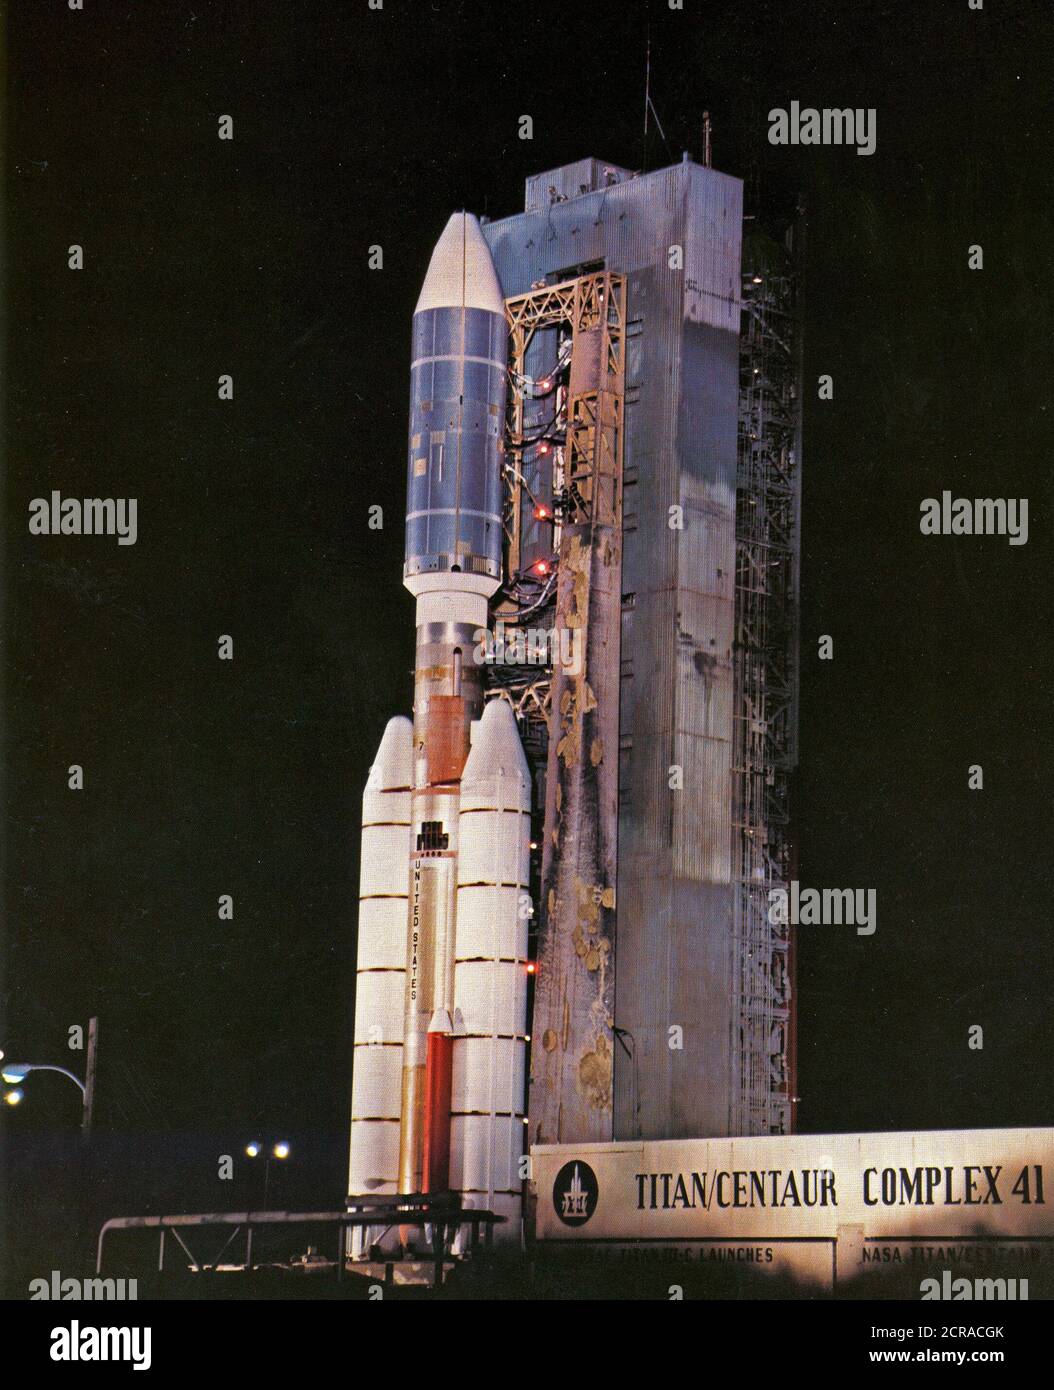 Voyager 2 was launched August 20, 1977 aboard a Titan-Centaur rocket. Stock Photo